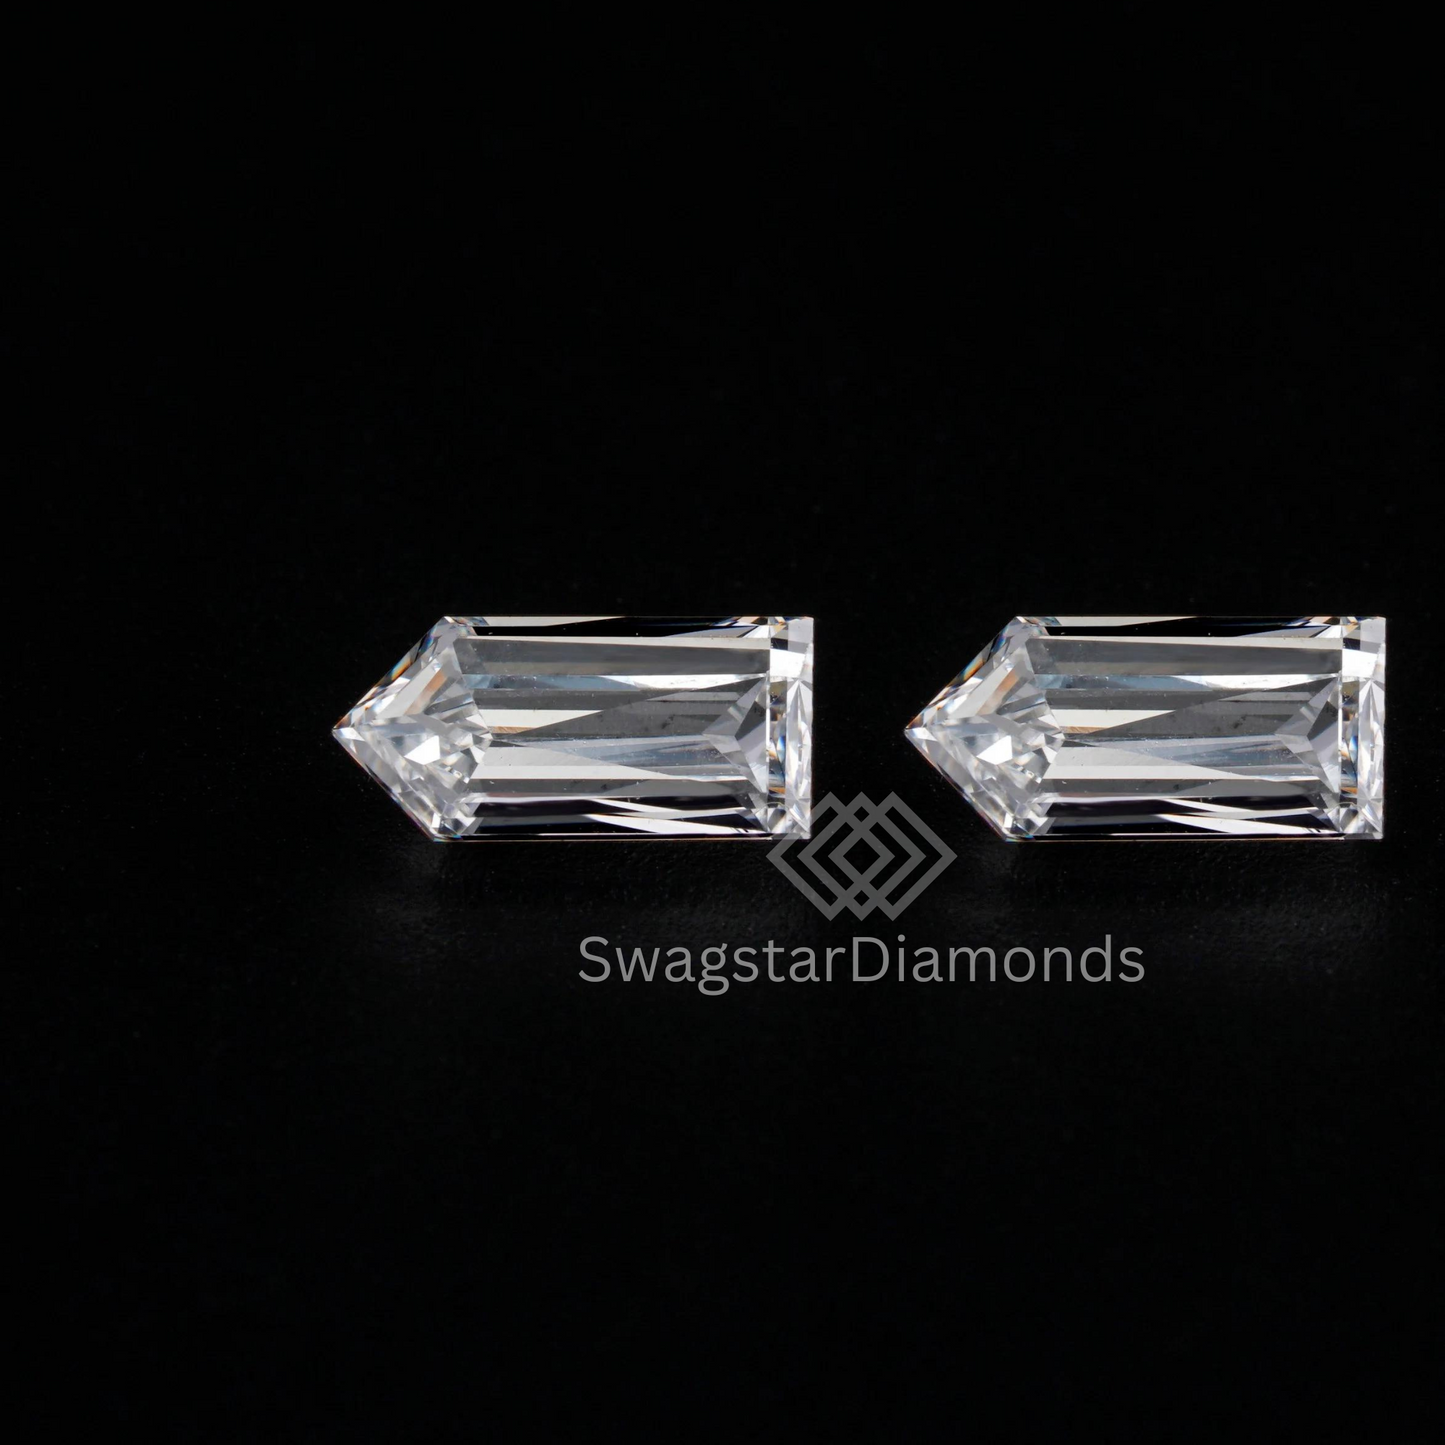 Bullet Shape Diamonds With Lab-Grown & Natural Diamonds, Jewelry By Leading Manufacturer From Swagstar, Surat. Explore Wedding, Engagement, Eternity Rings, Earring & Studs, Bracelets In 10k, 14k, & 18k Gold Varieties, Including White, Yellow, Rose Gold.